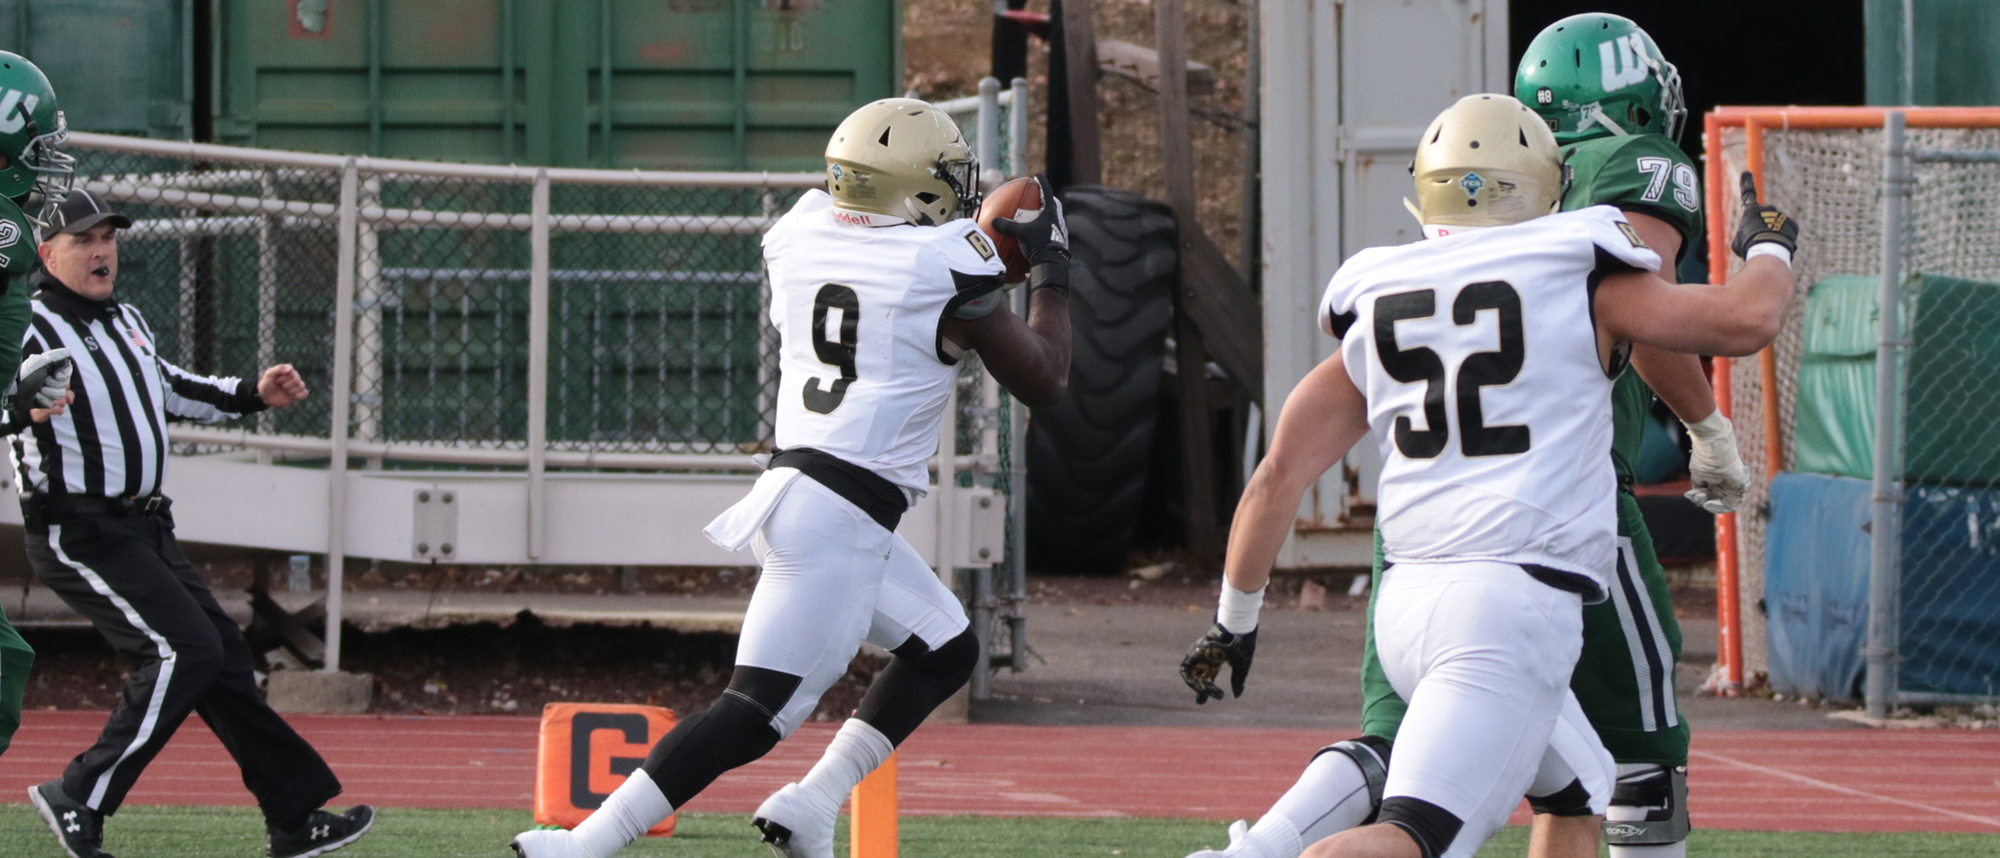 Ukele pick-6 helps Bryant close 2019 with win